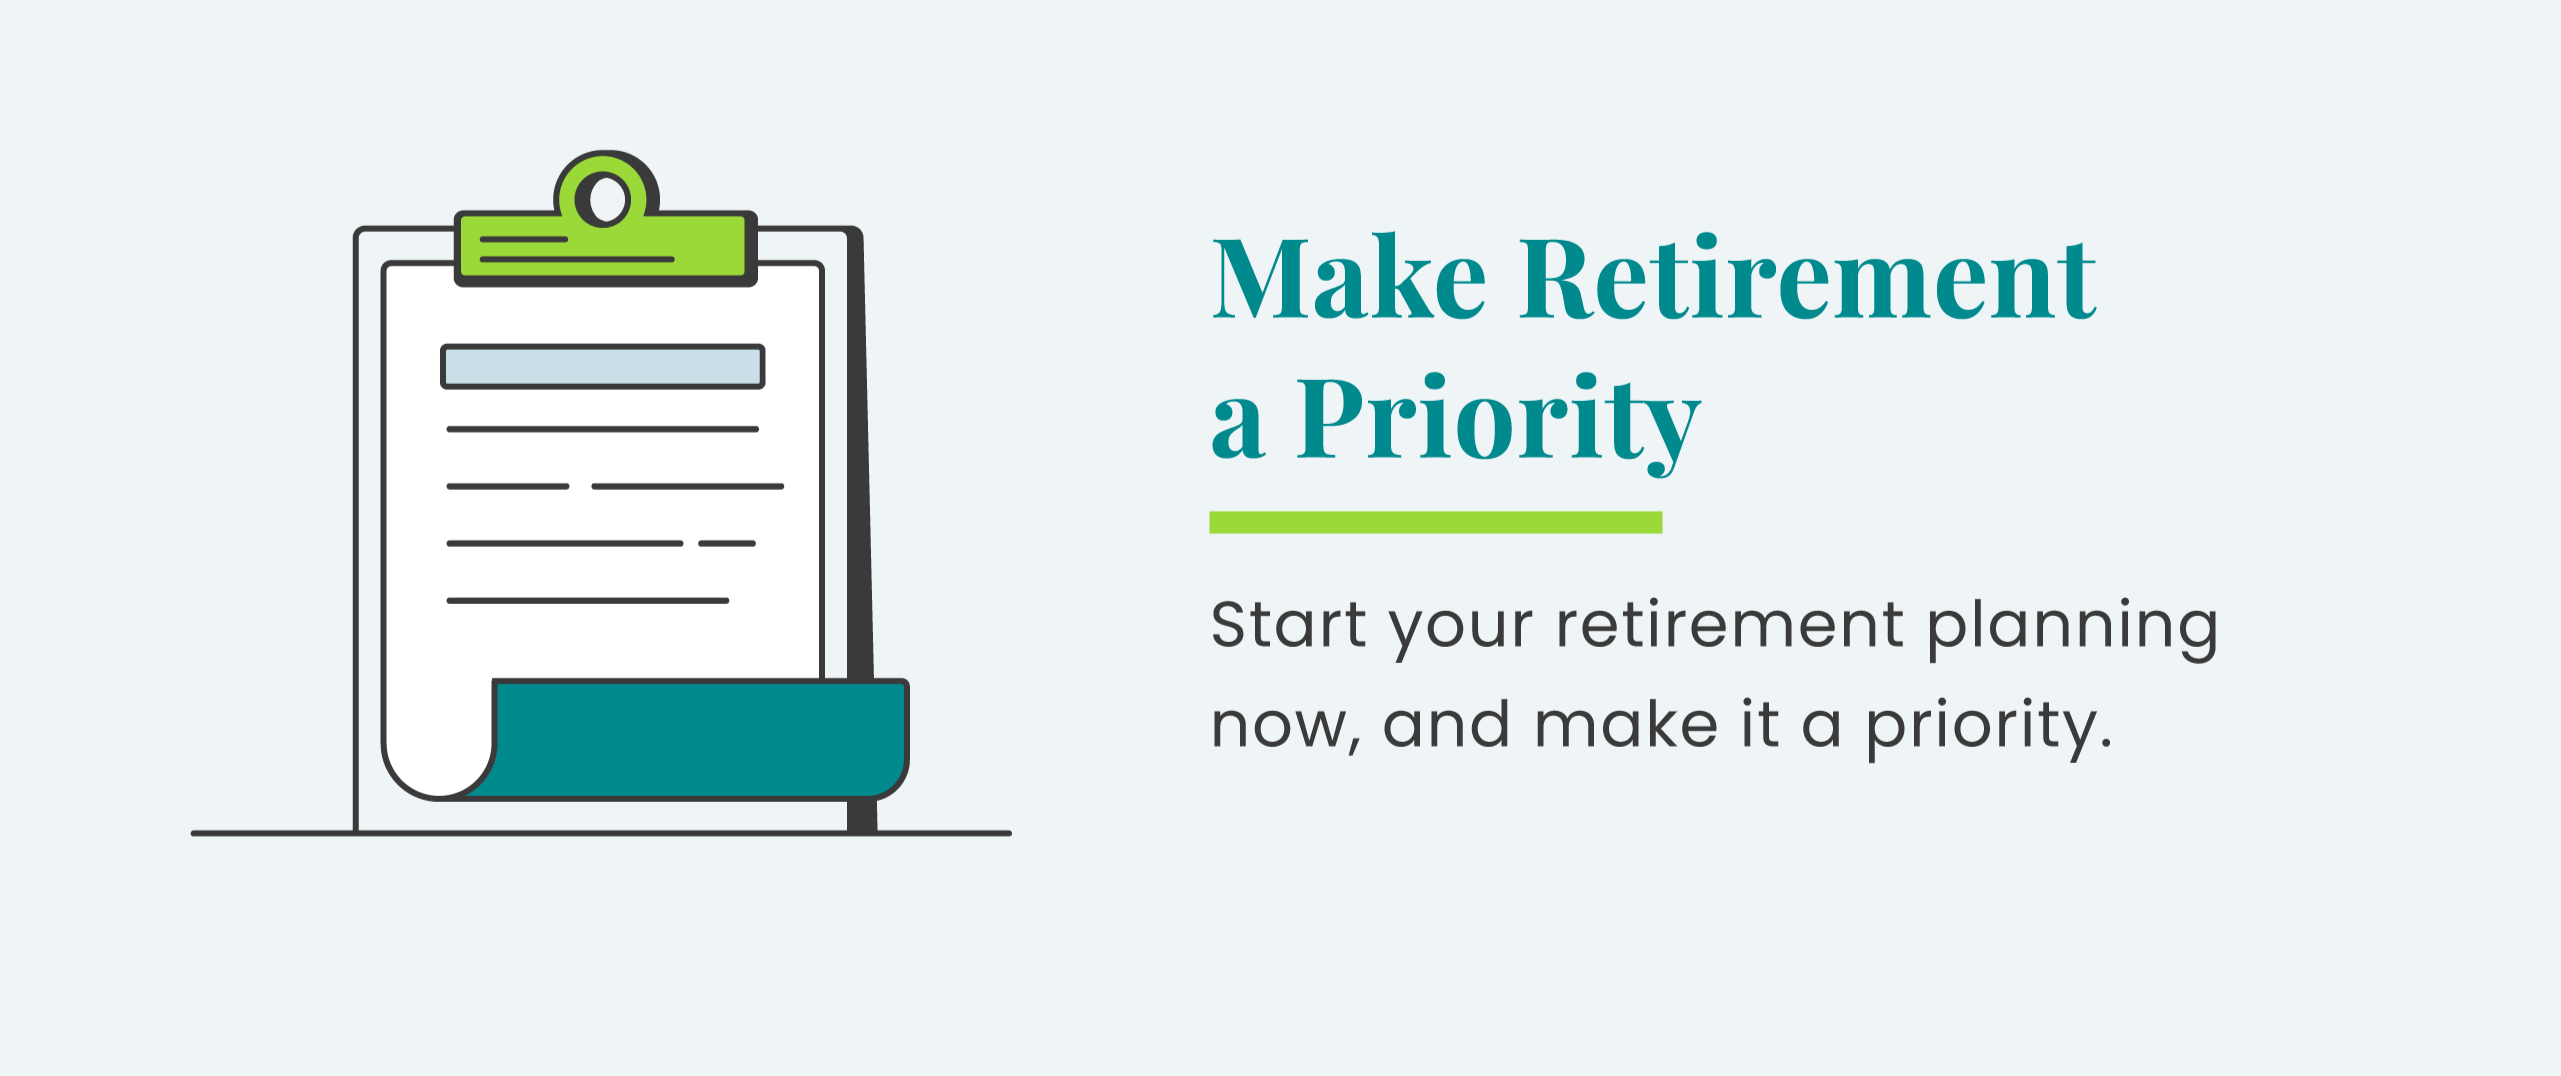 making retirement a priority